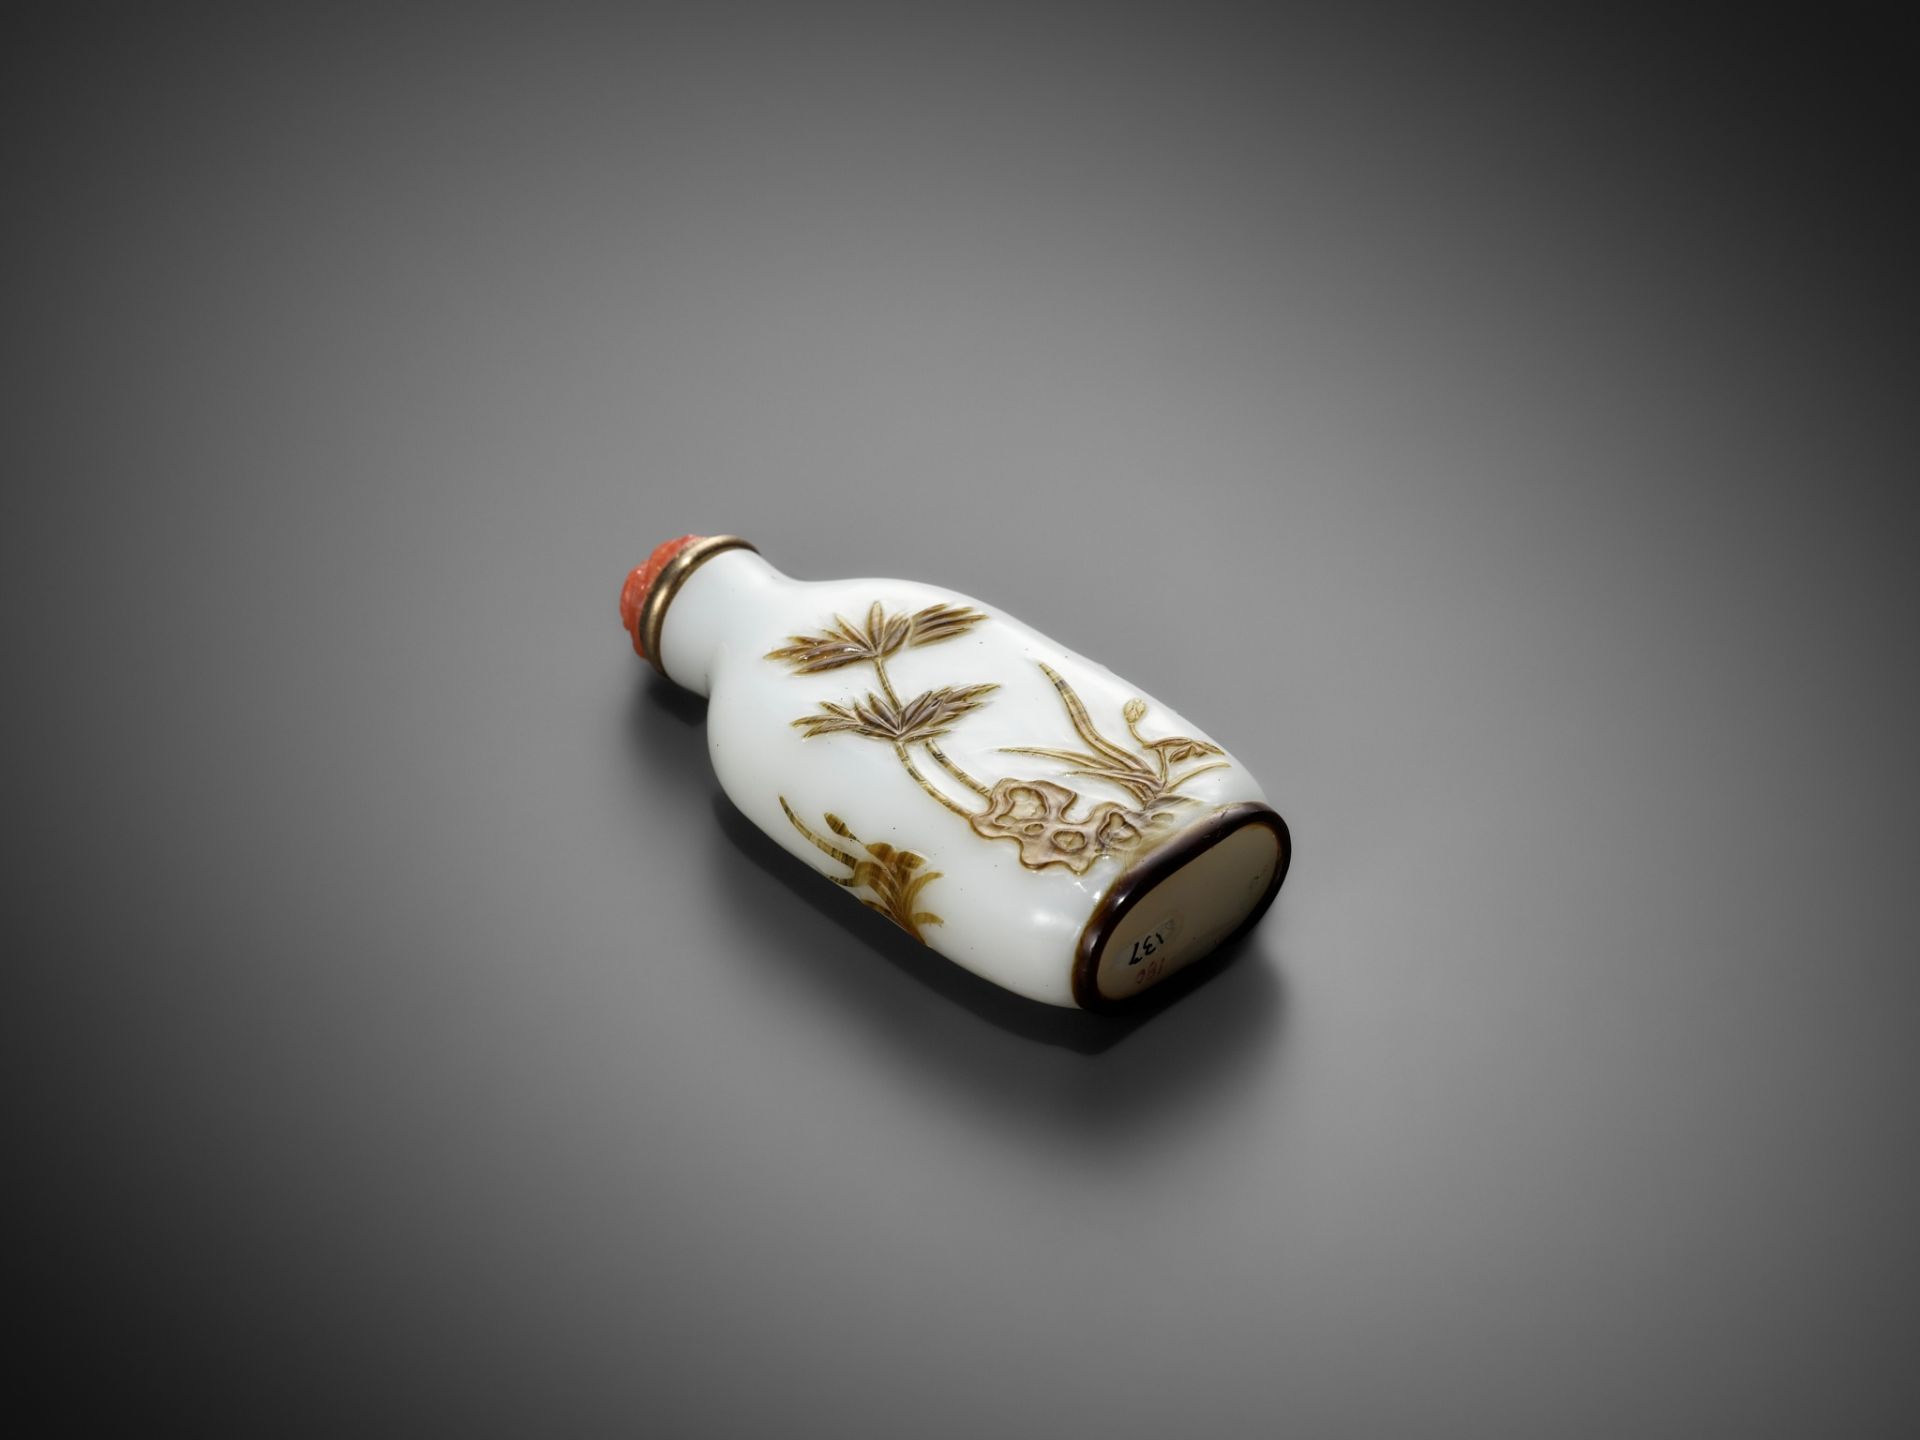 AN INSCRIBED OVERLAY GLASS ‘CAT AND BUTTERFLY’ SNUFF BOTTLE, BY WANG SU, YANGZHOU SCHOOL, 1820-1840 - Image 18 of 19